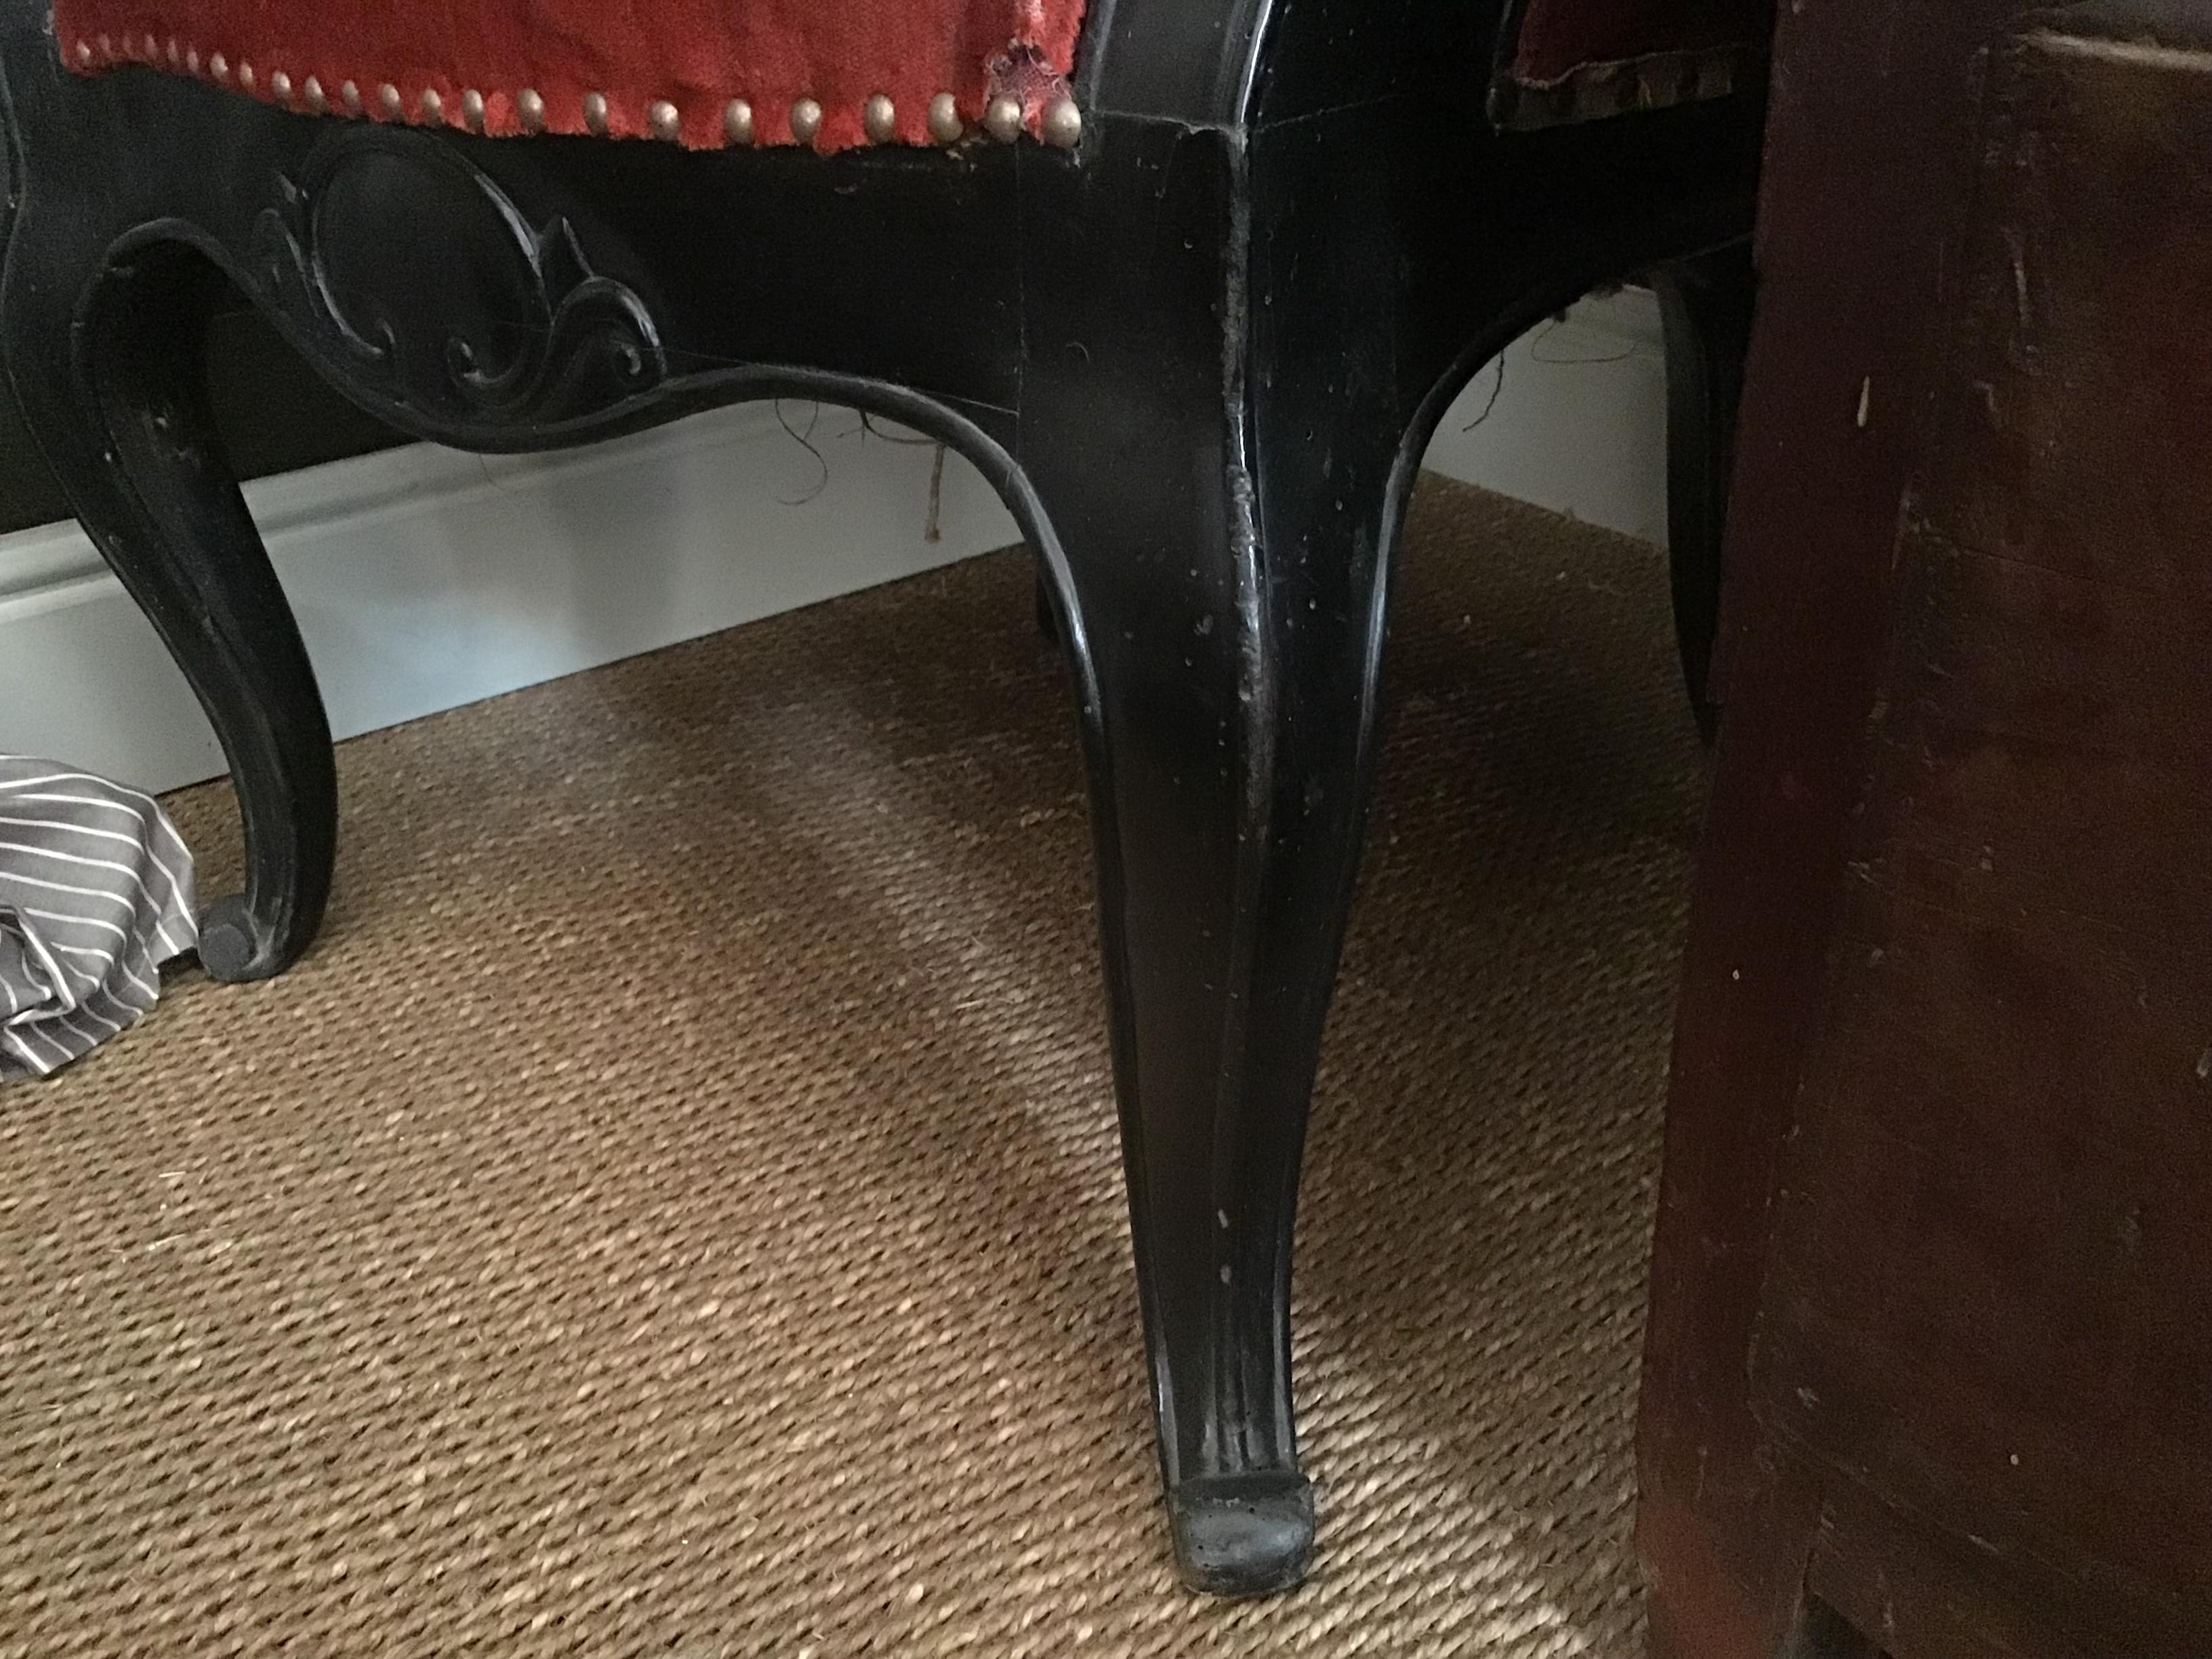 20th Century French Upholstered Armchair in Carved Ebonized Wood from 1920 For Sale 1